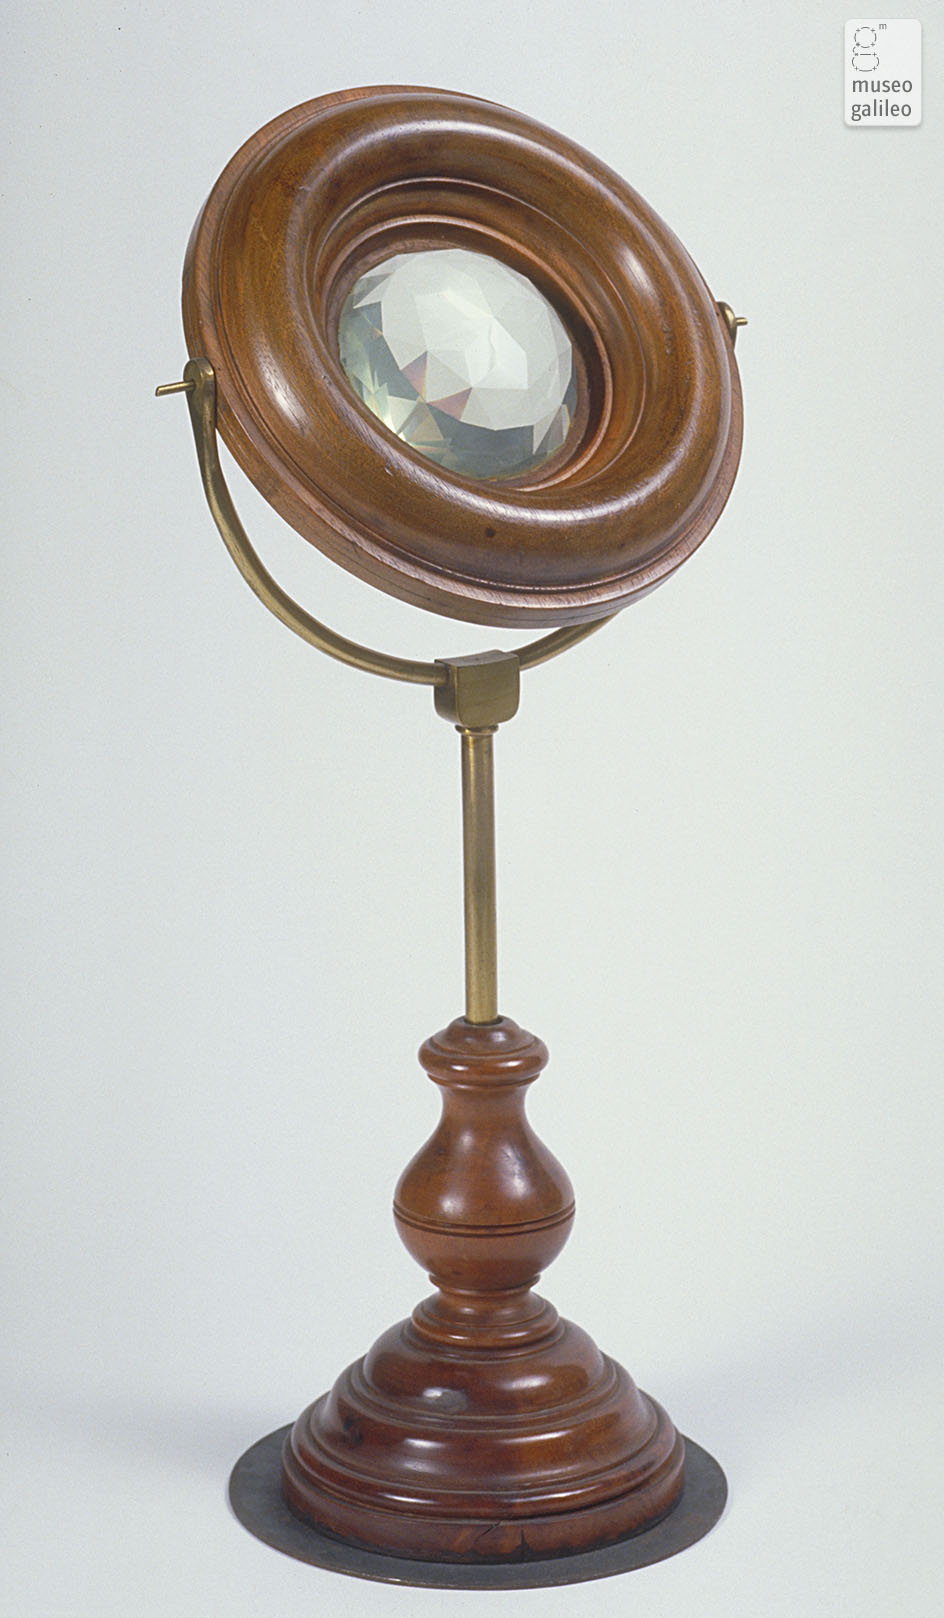 Mounted prismatic lens (Inv. 768)